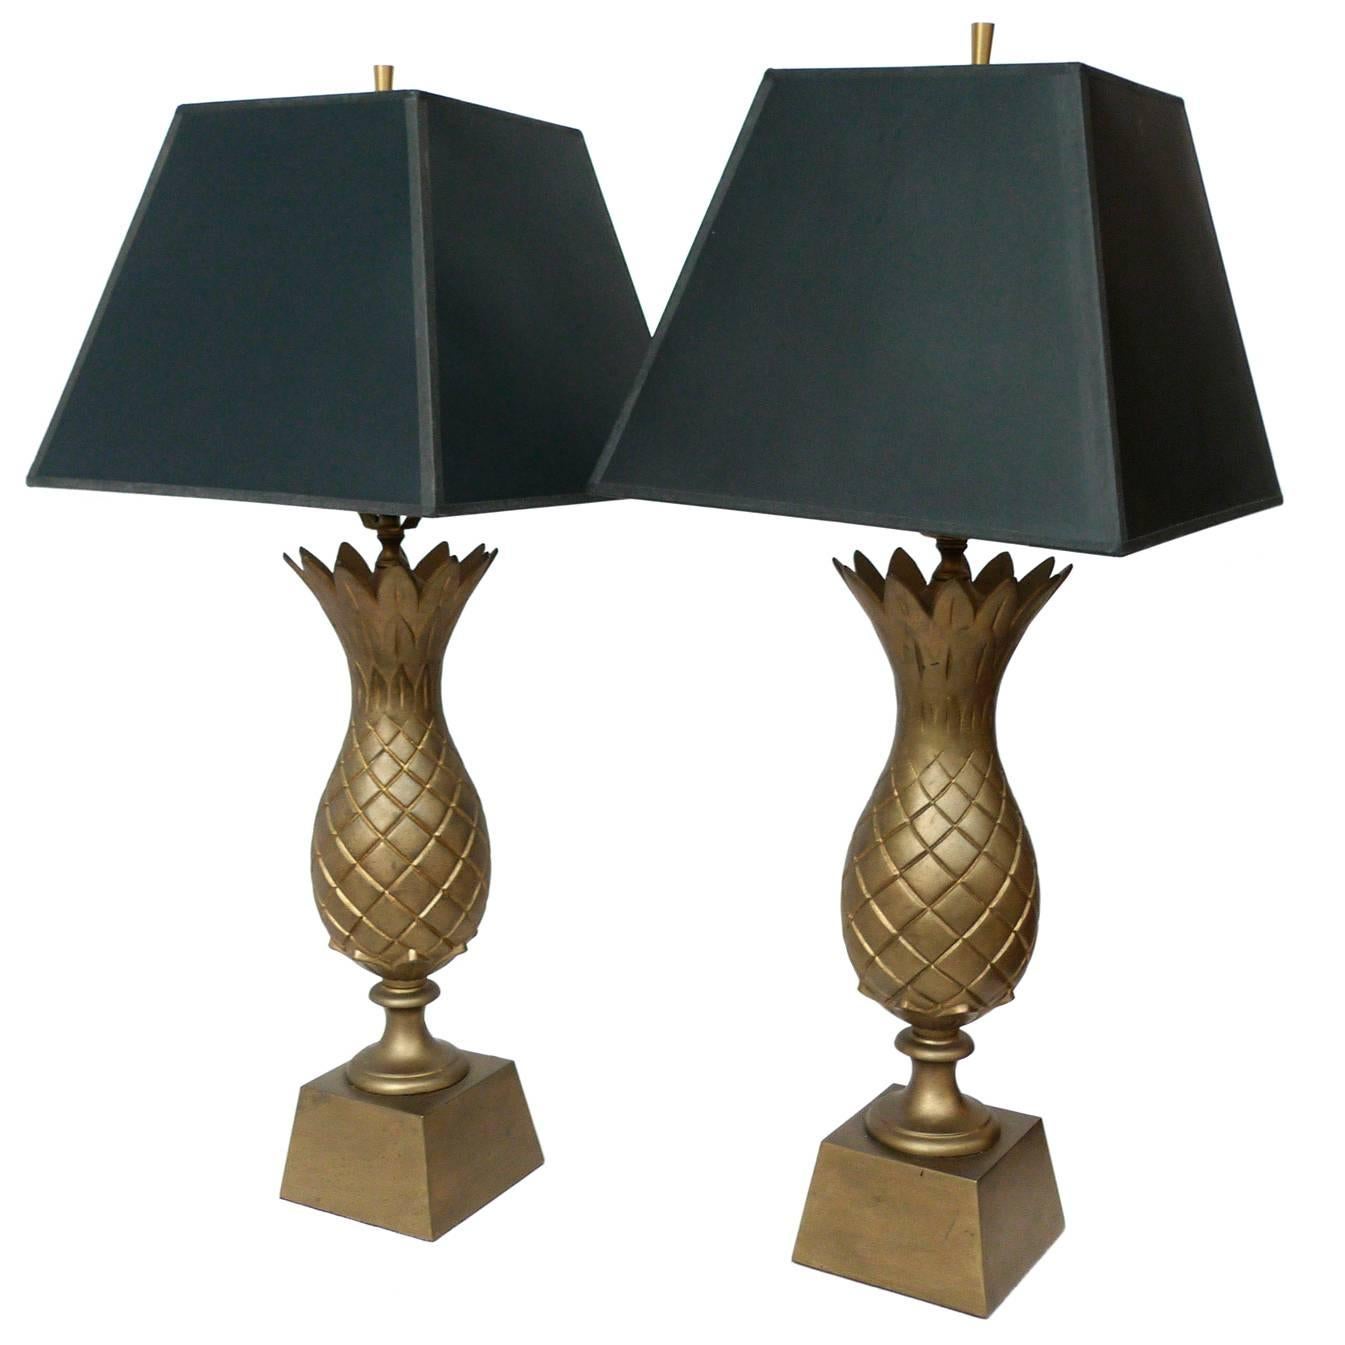 1960s Brass Pineapple Lamps, A Pair